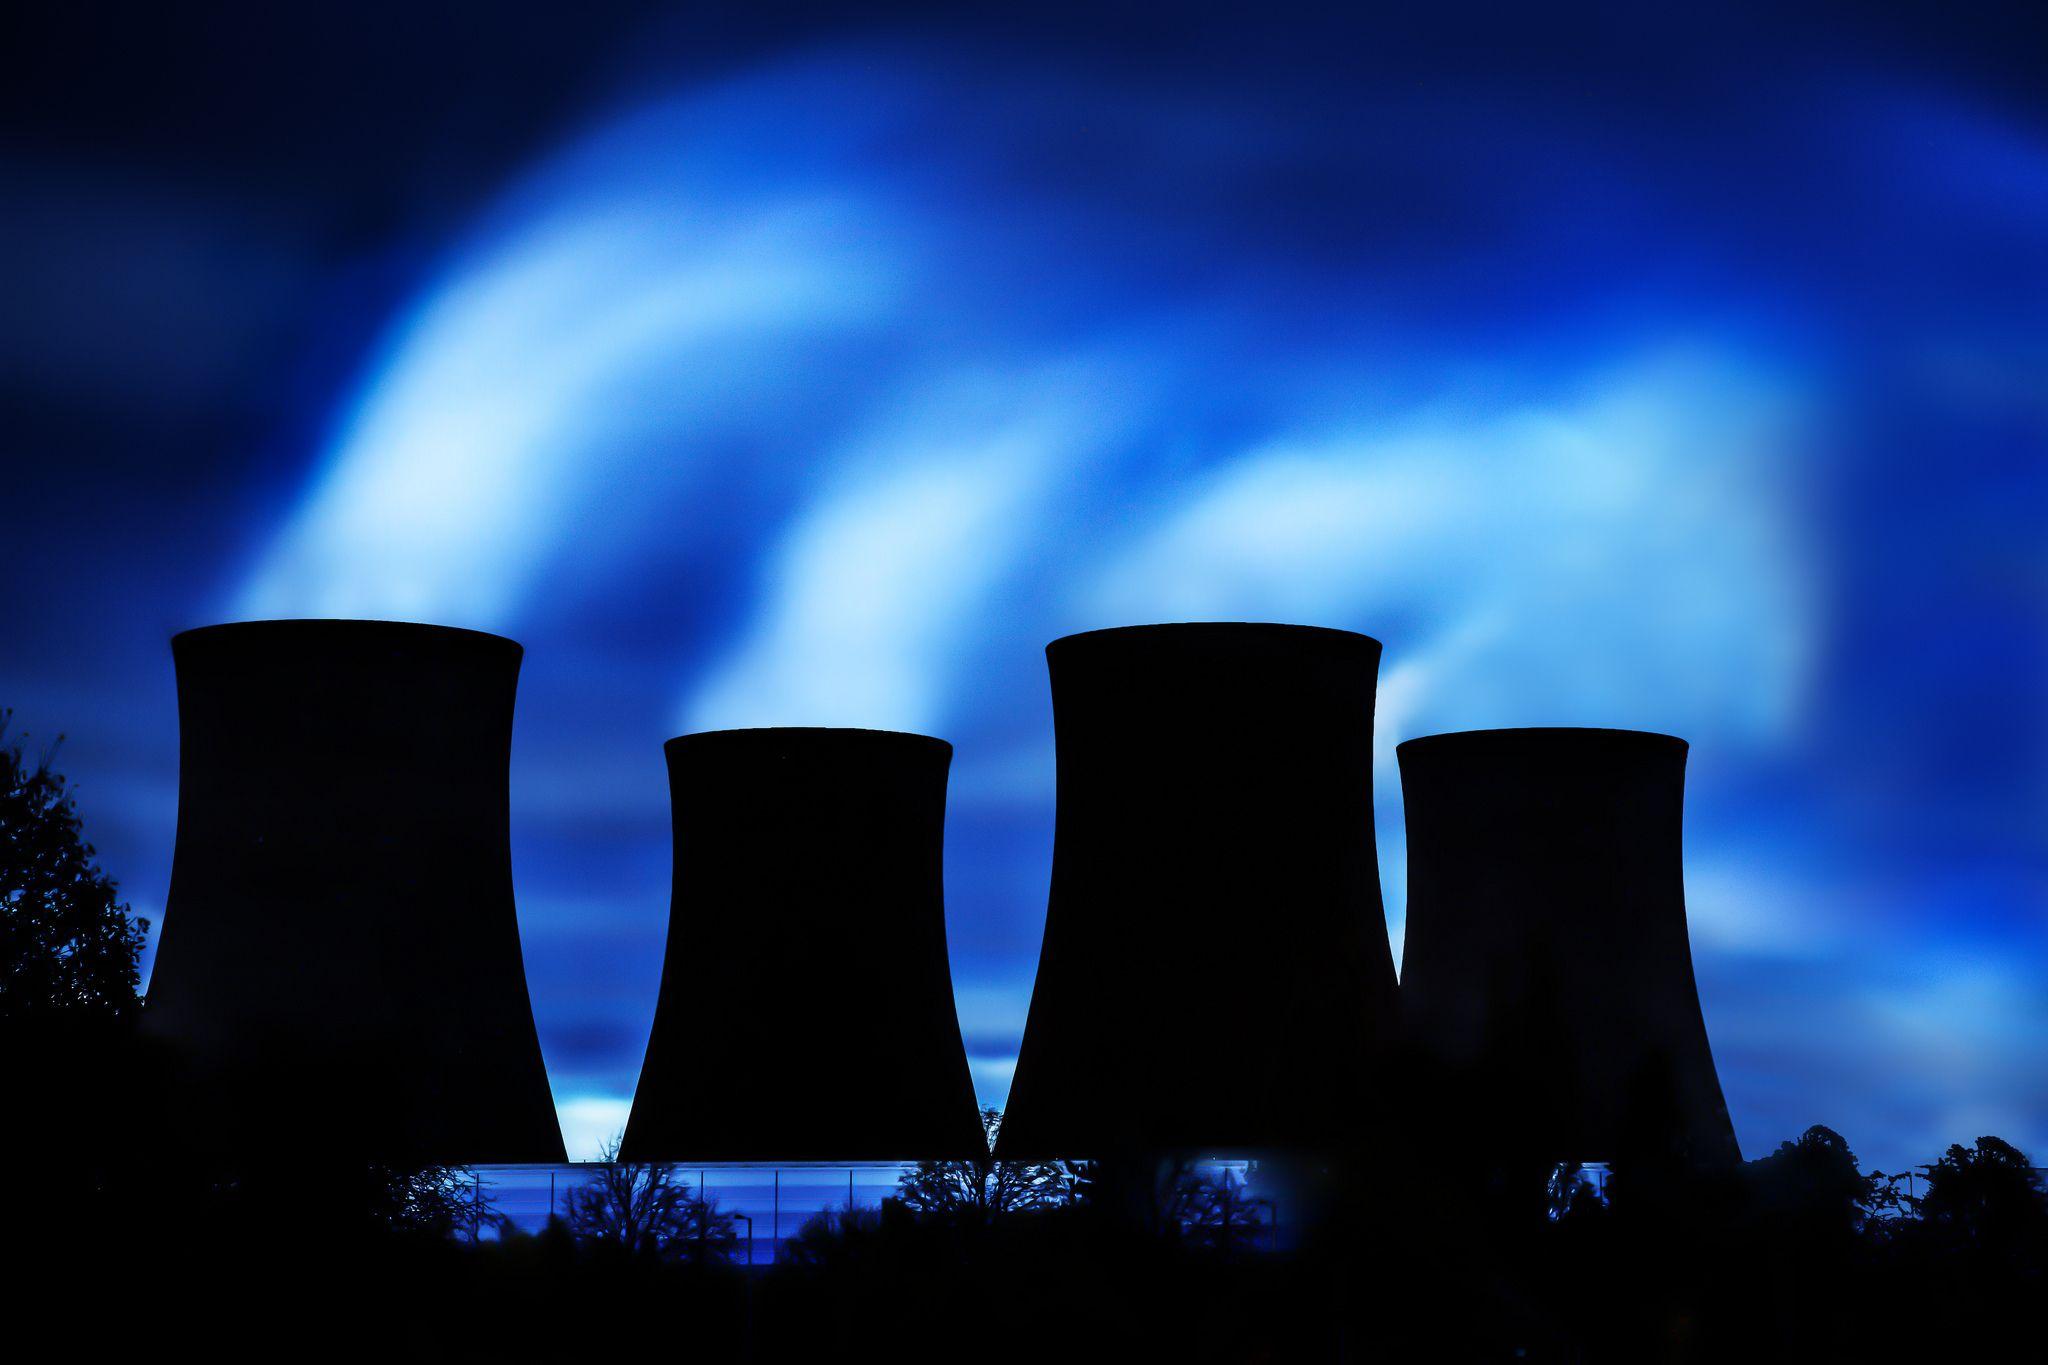 HD wallpaper nuclear power plant cooling tower energy current  electricity  Wallpaper Flare